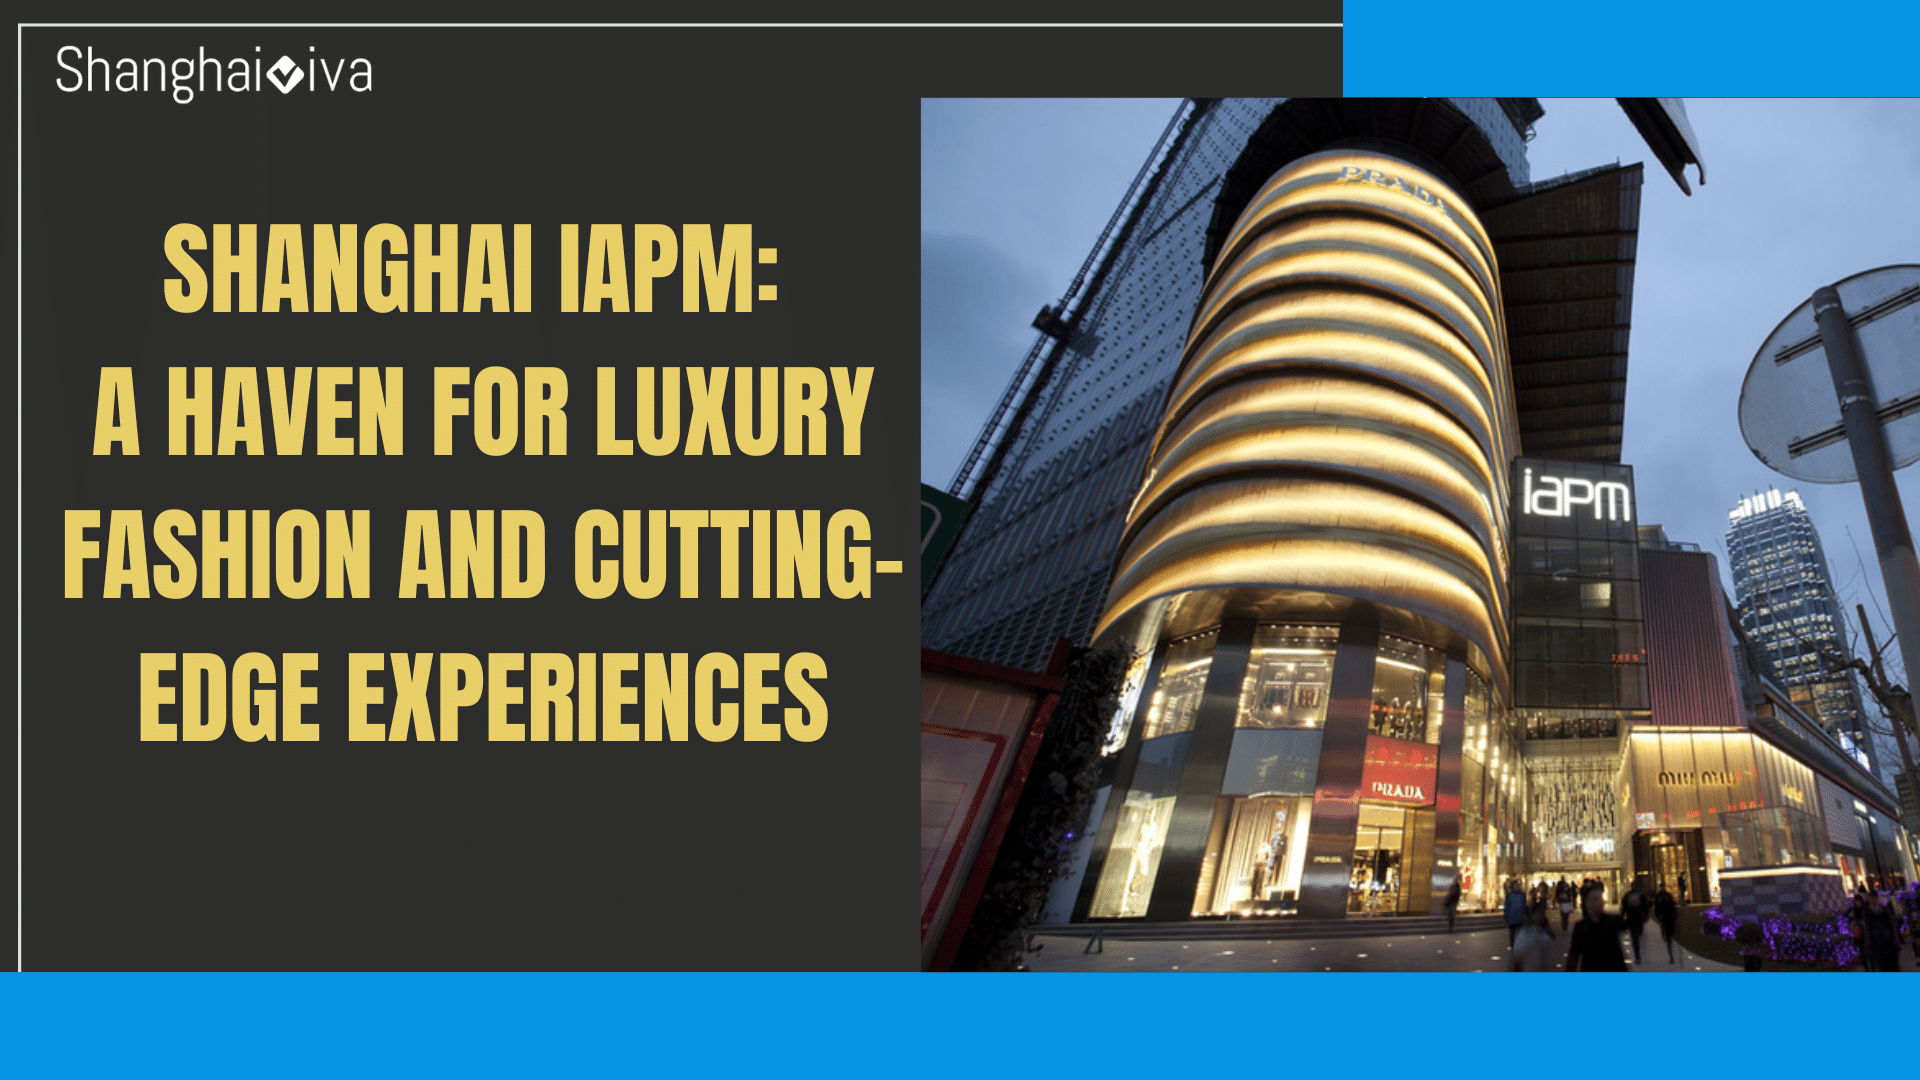 Shanghai IAPM: A Haven for Luxury Fashion and Cutting-Edge Experiences